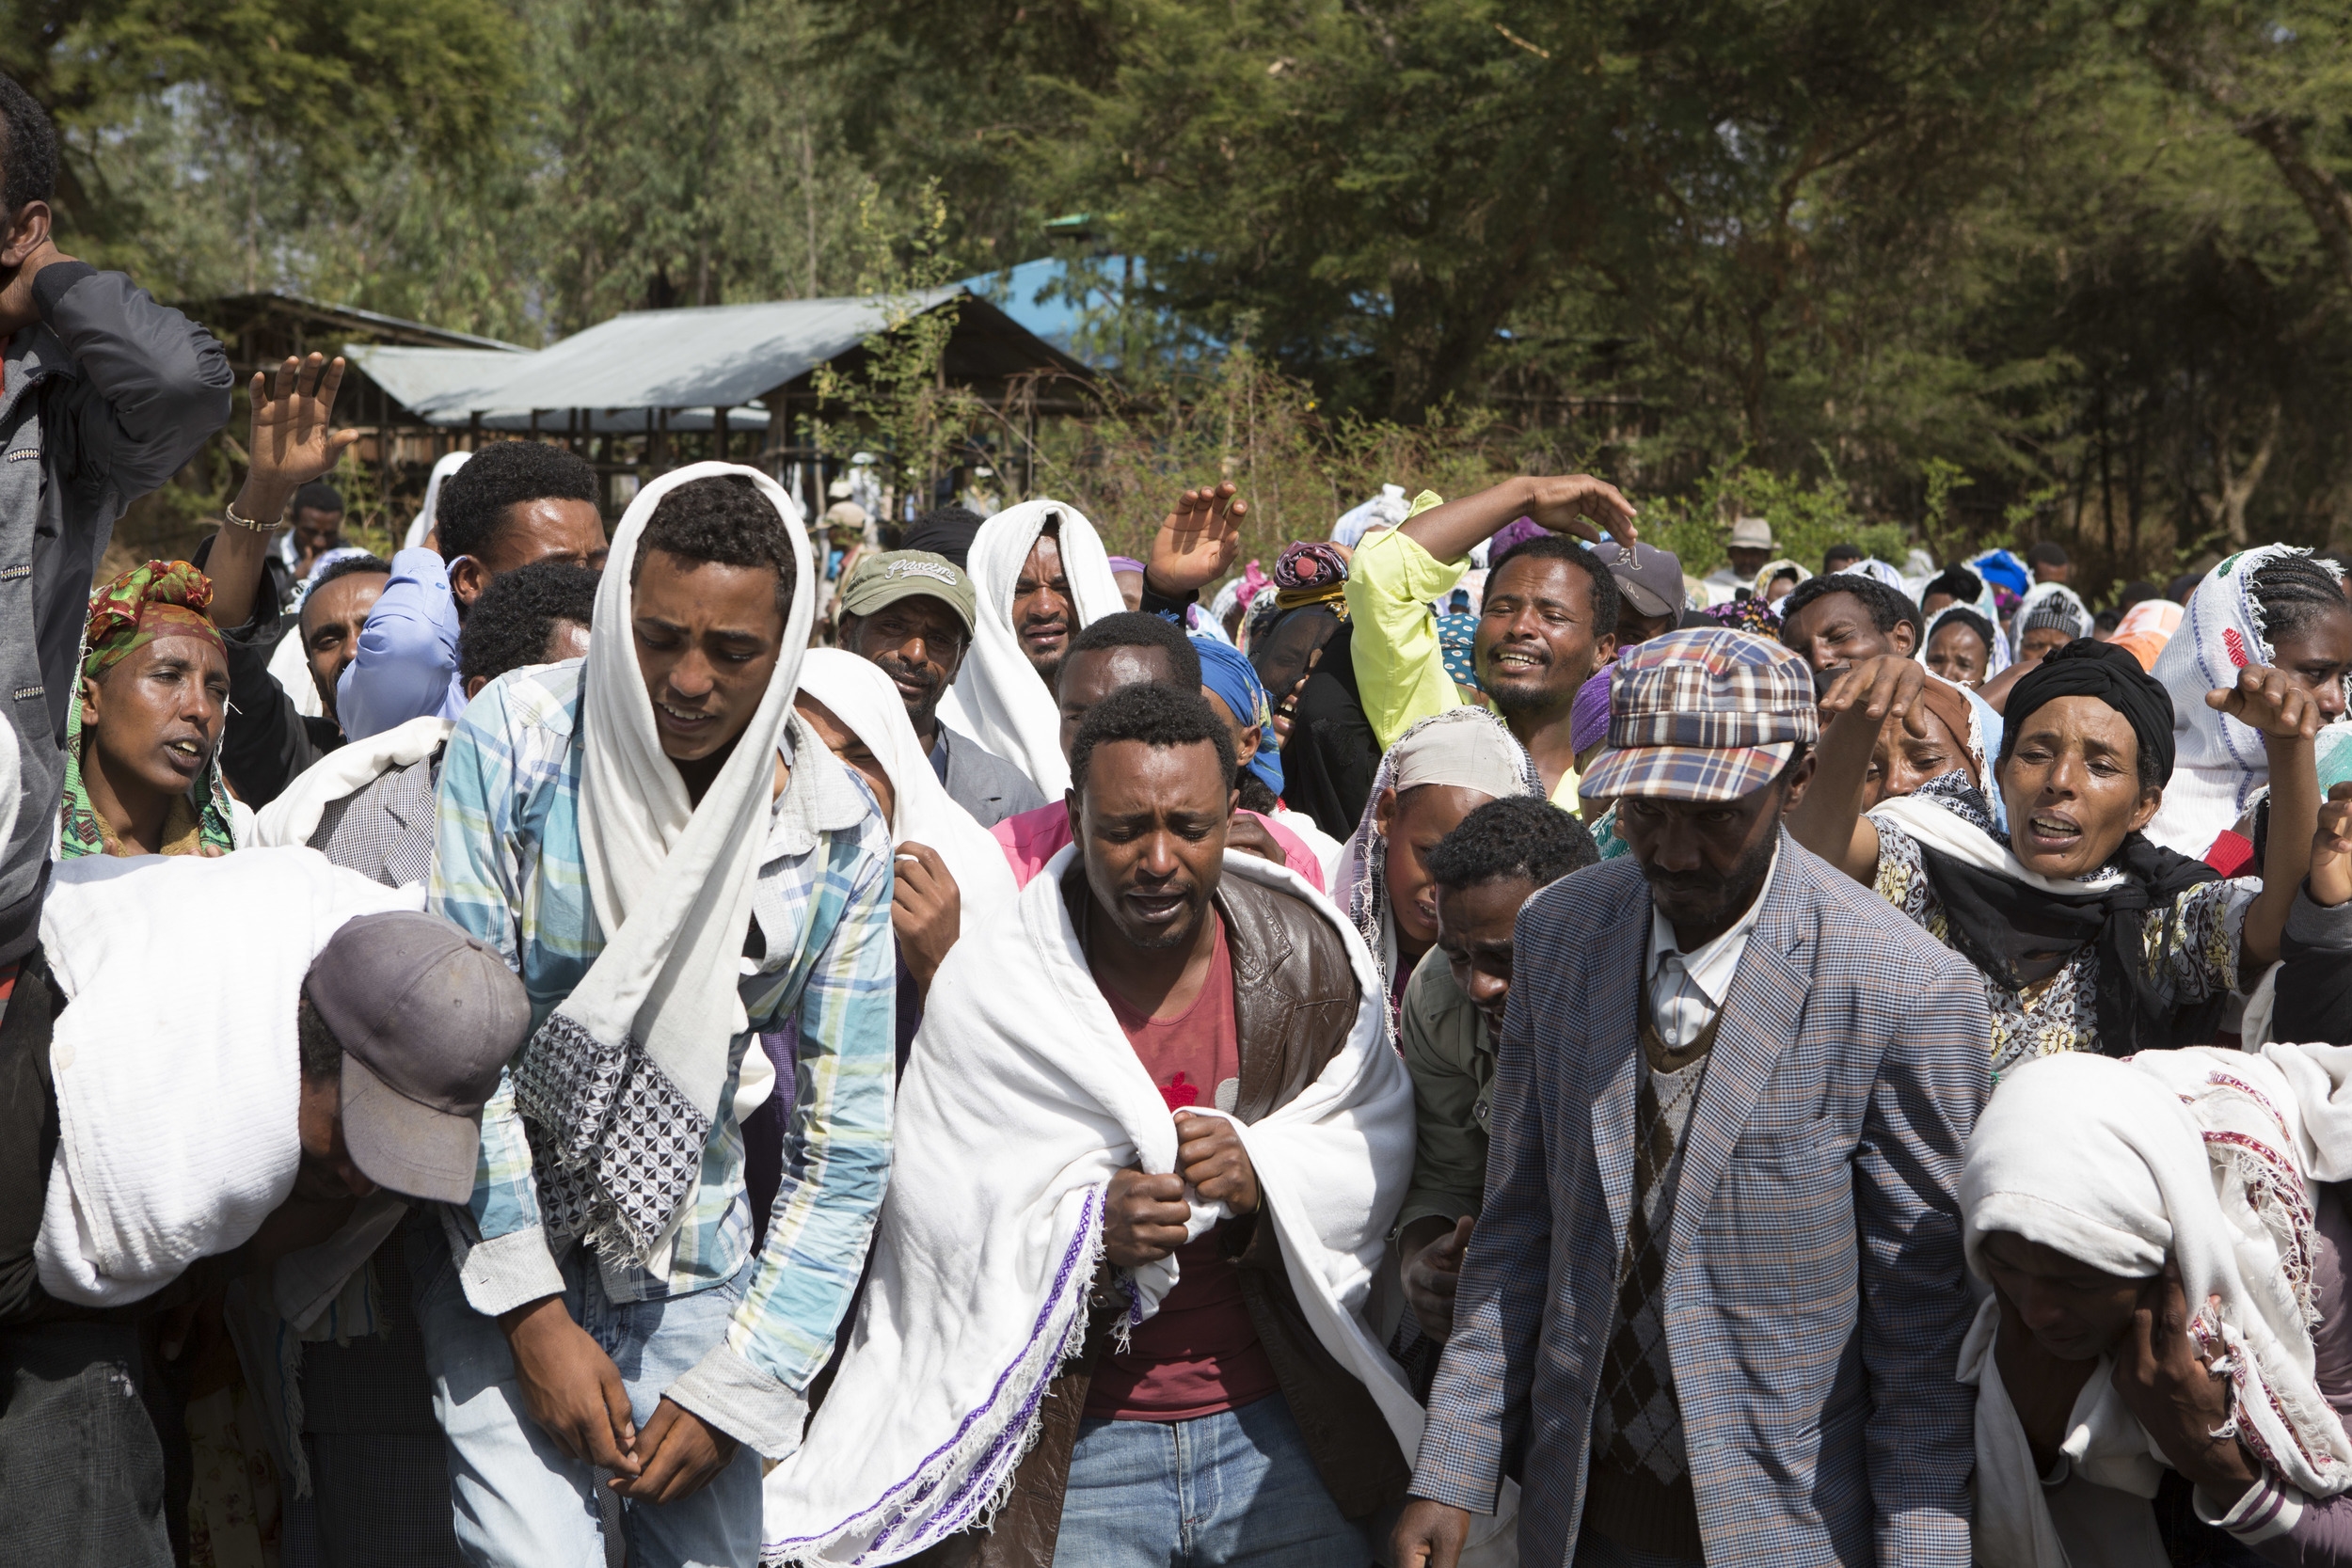  People are pictured mourning the death of Dinka Chala in Yubdo Village, about 100km from Addis Ababa in the Oromia region on 17 Dec 2015. Dinka Chala was shot dead by the Ethiopian Defense the day earlier. He was accused of protesting, but his famil